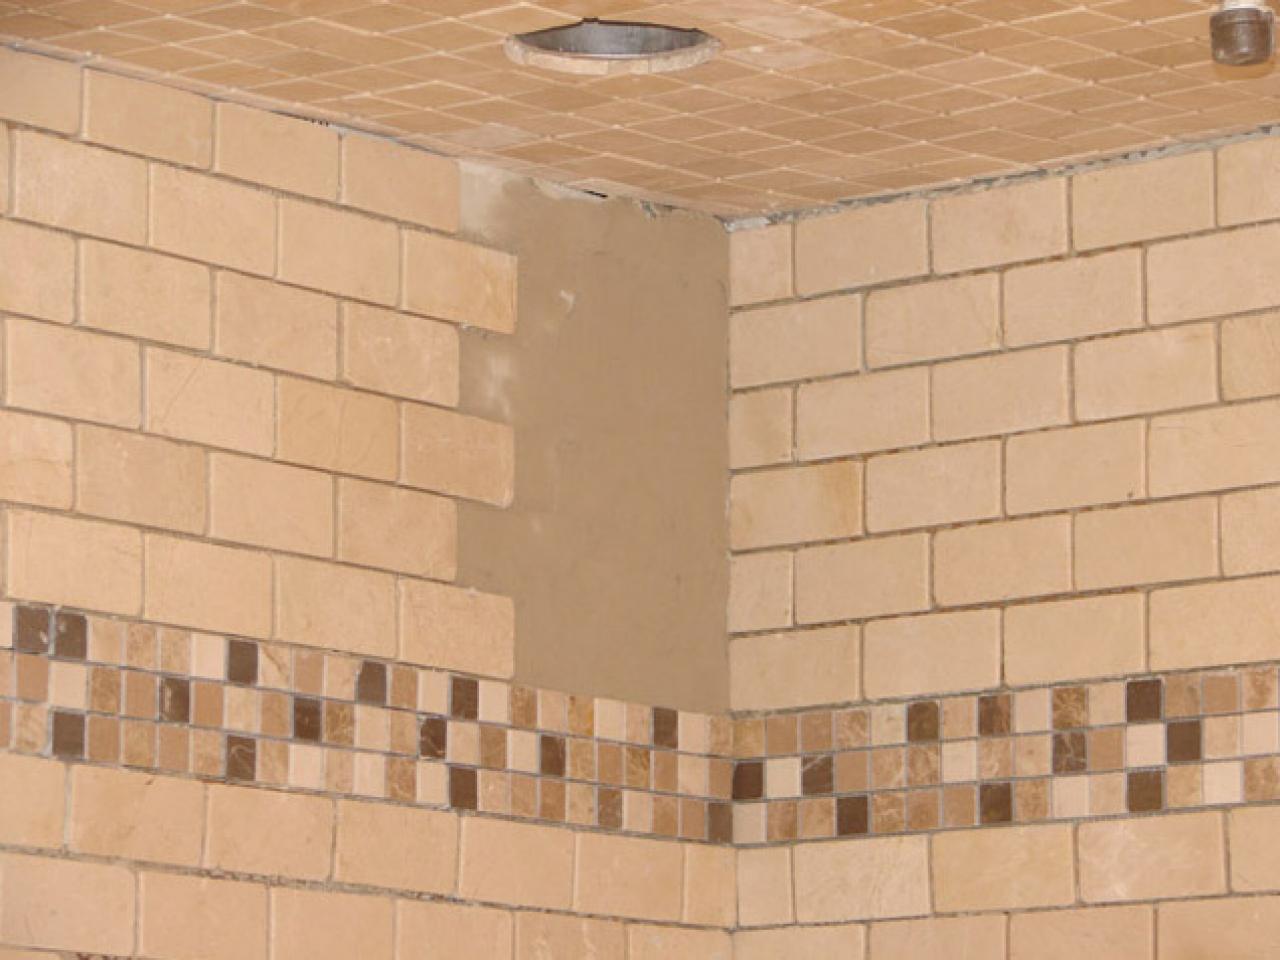 Install Tile In A Bathroom Shower, How To Install Mosaic Tile Border In Shower